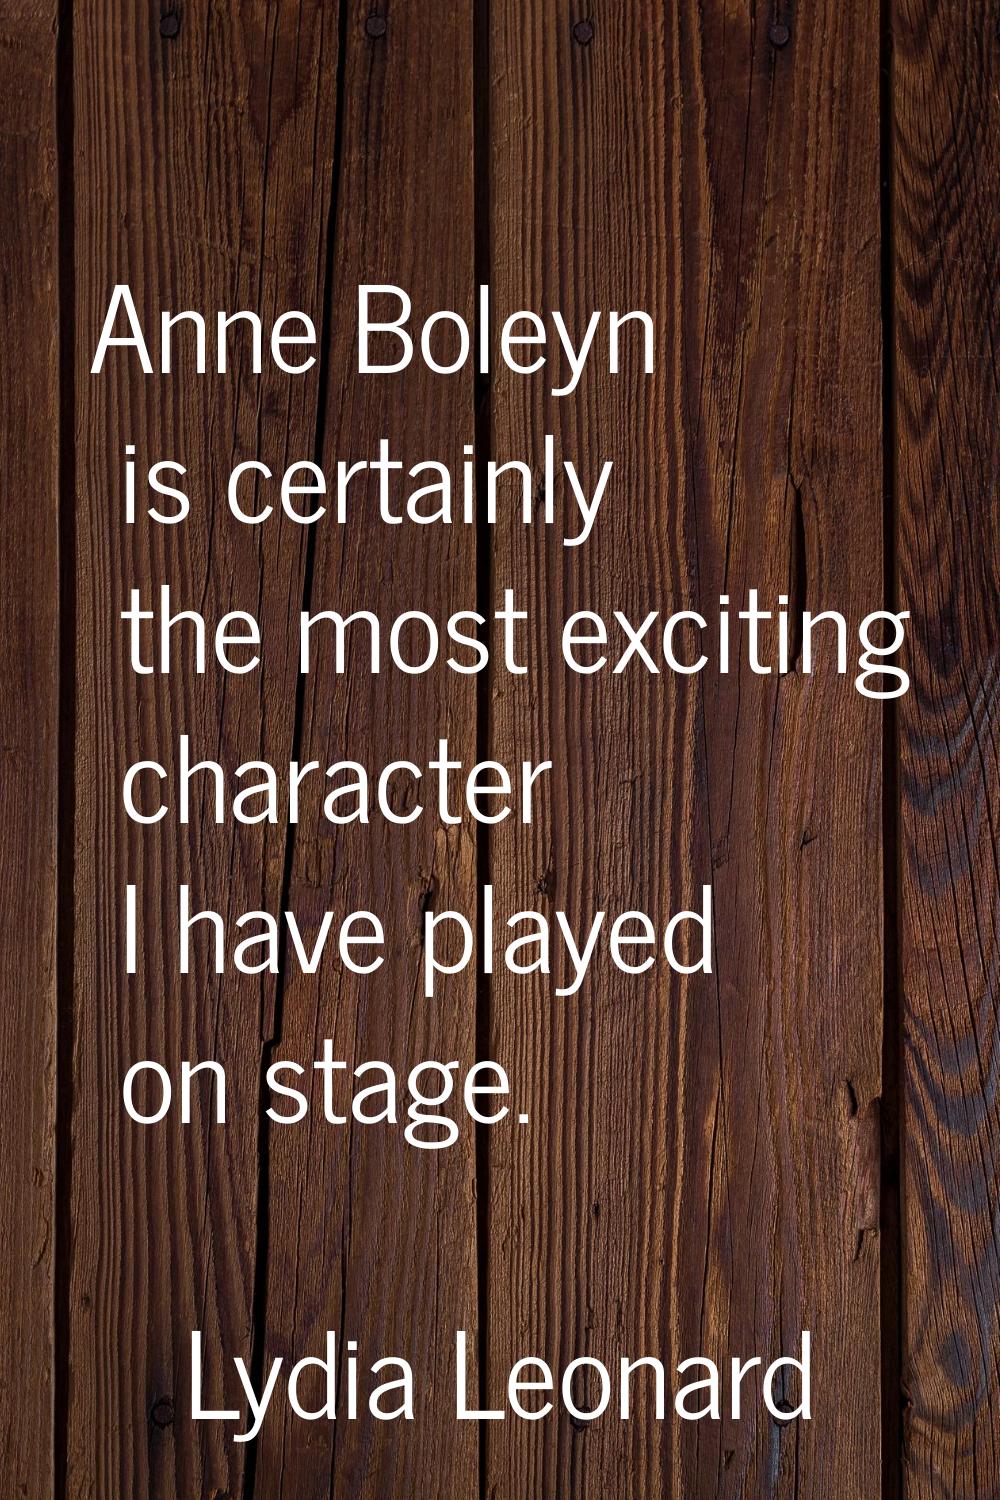 Anne Boleyn is certainly the most exciting character I have played on stage.